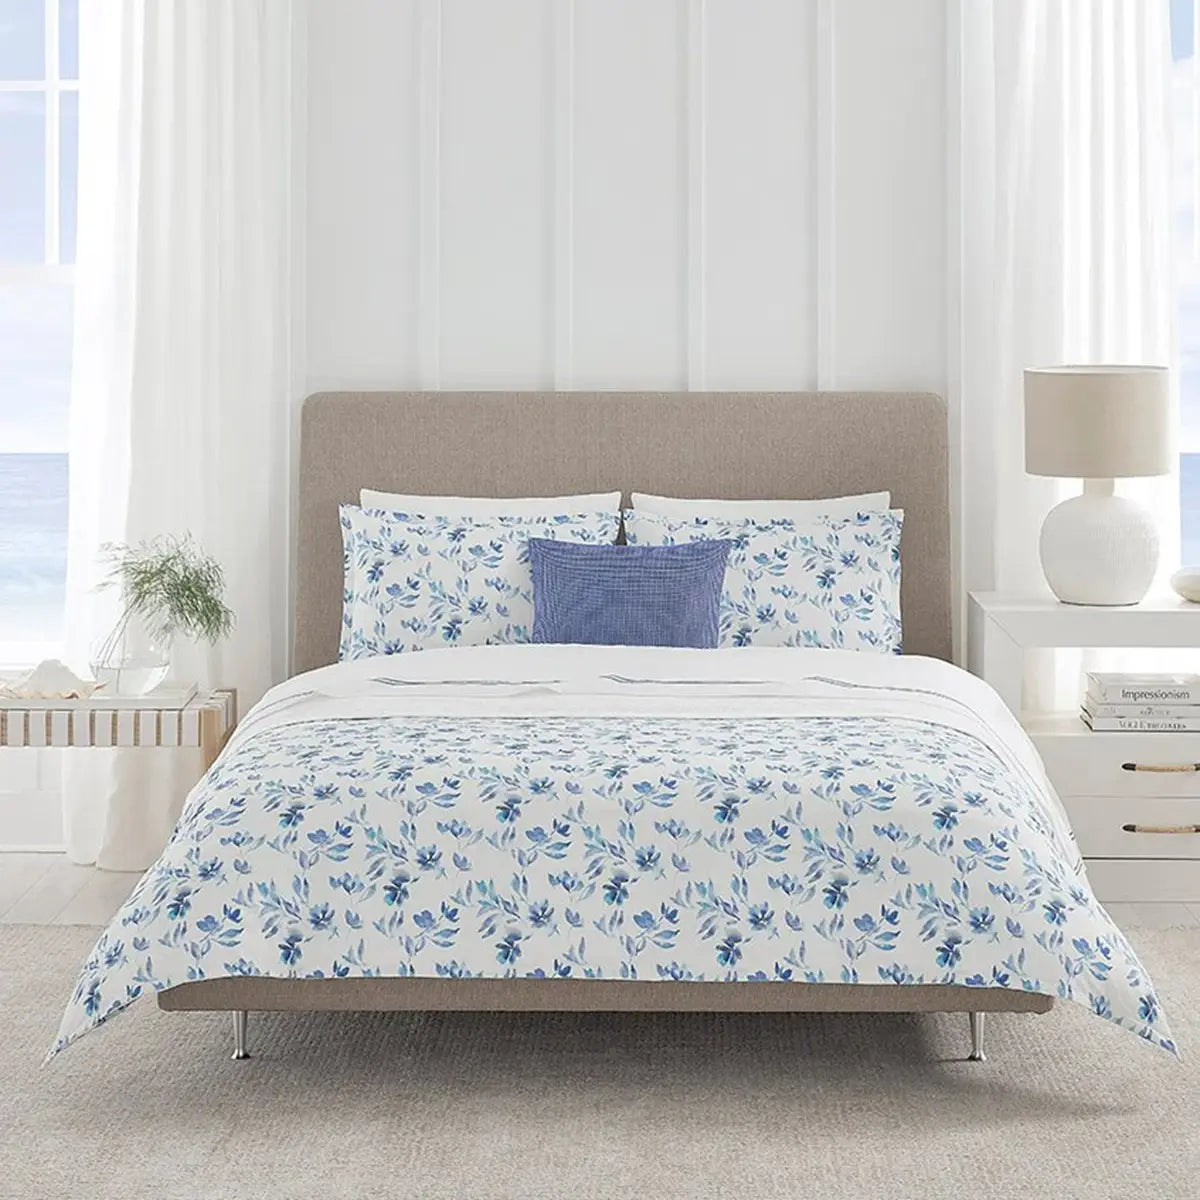 Sferra Procida Bedding Collection in Cobalt in a room